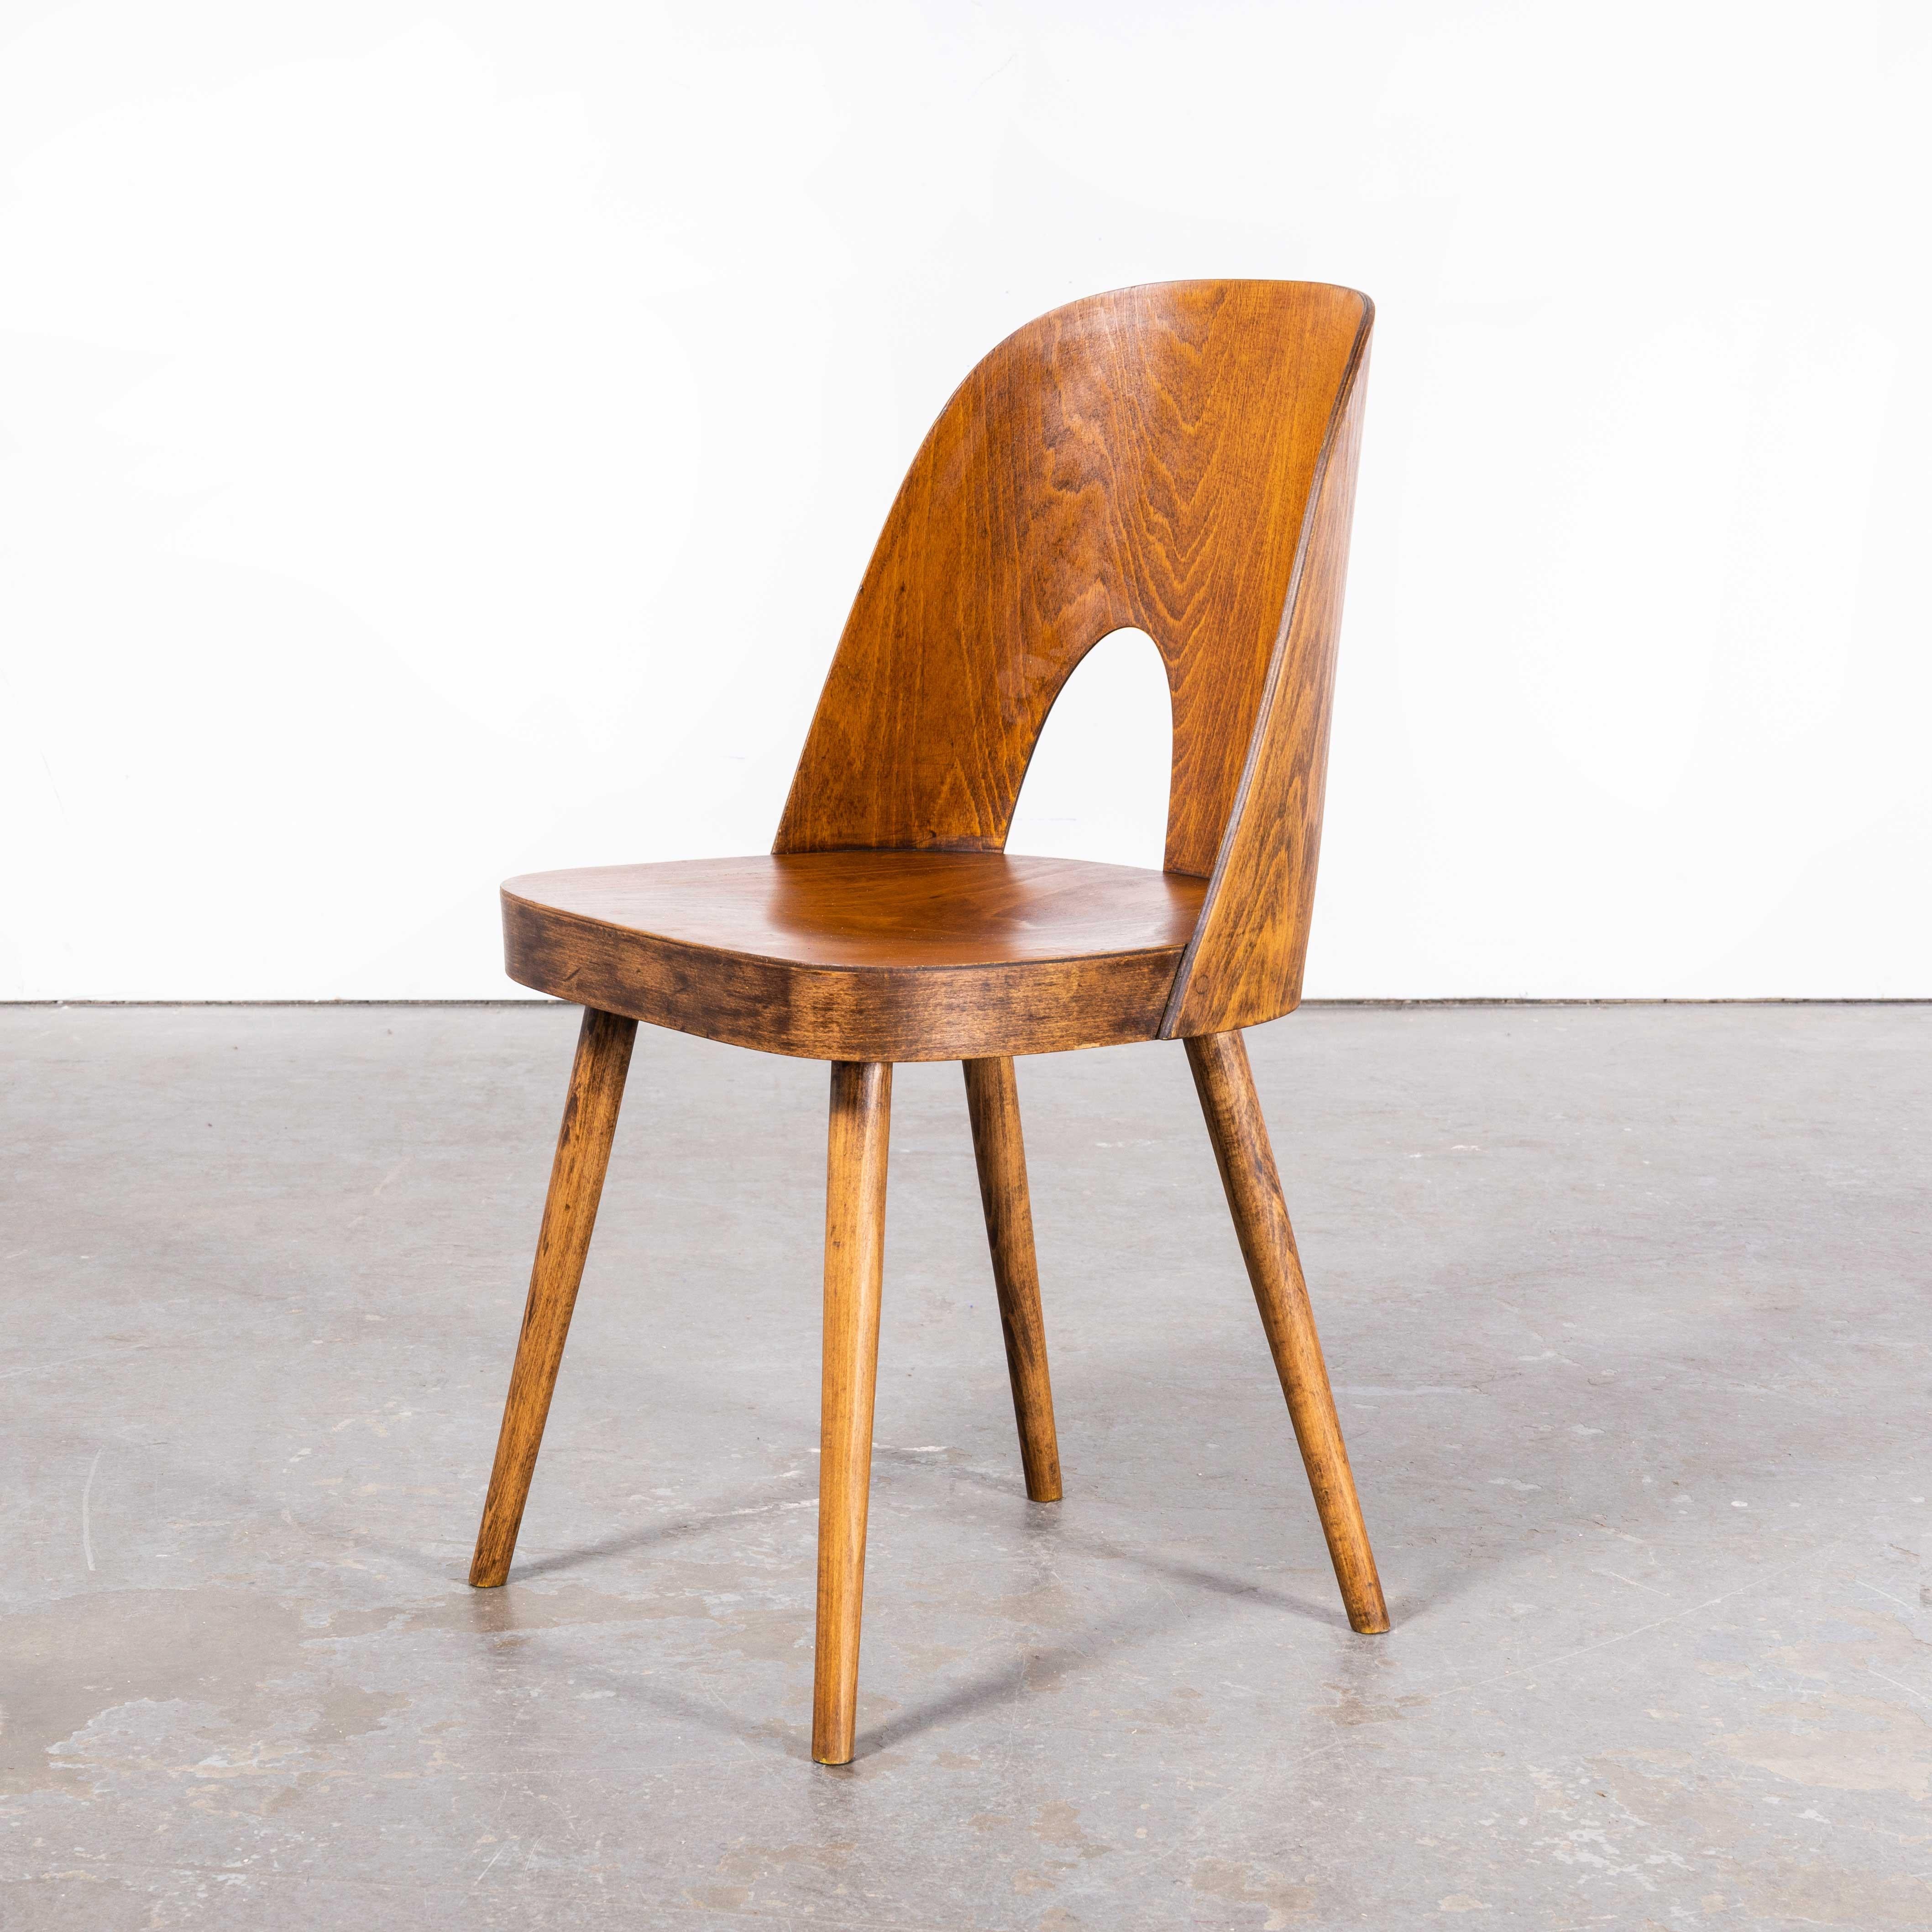 1960s Mid Oak Dining Chair By Antonin Suman For Ton – Double Vent
1960s Mid Oak Dining Chair By Antonin Suman For Ton – Double Vent. Antonin Suman joined Thonet in 1949 and later moved to the Thonet offshoot Ton when the firms split during the